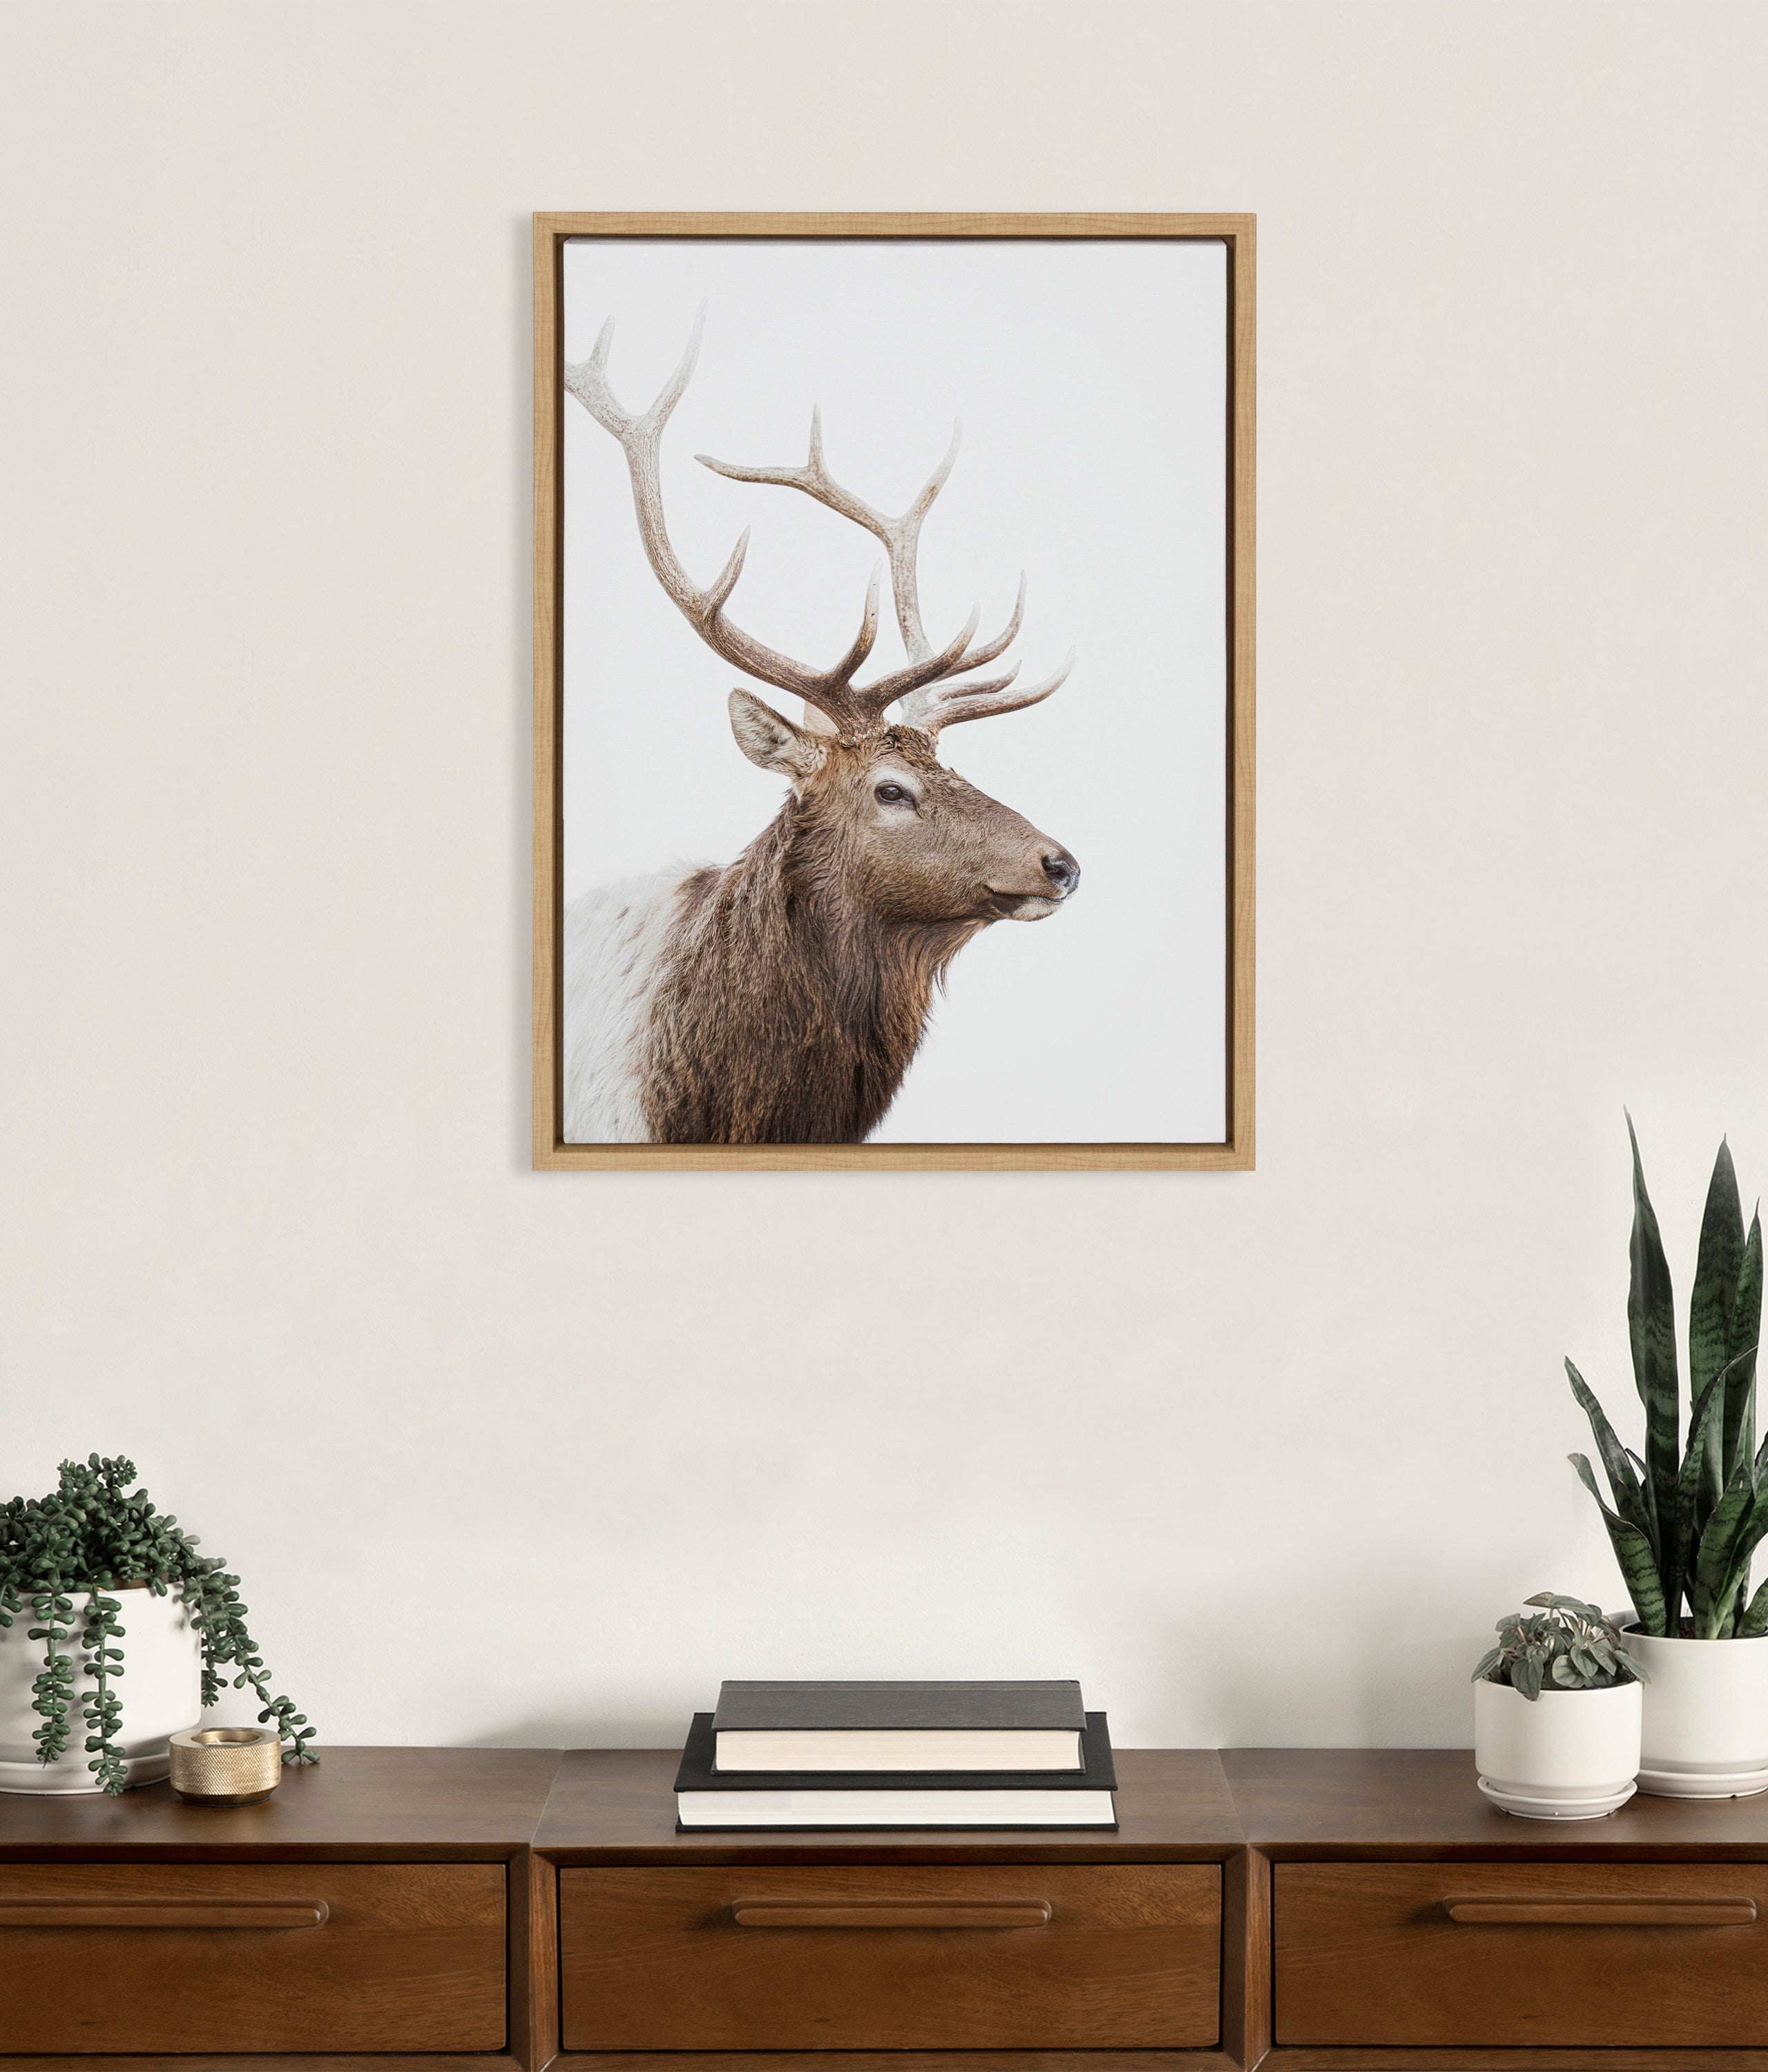 18 X 24 Sylvie Stag Profile Framed Canvas By Amy Peterson Art Studio  Natural - Kate & Laurel All Things Decor : Target